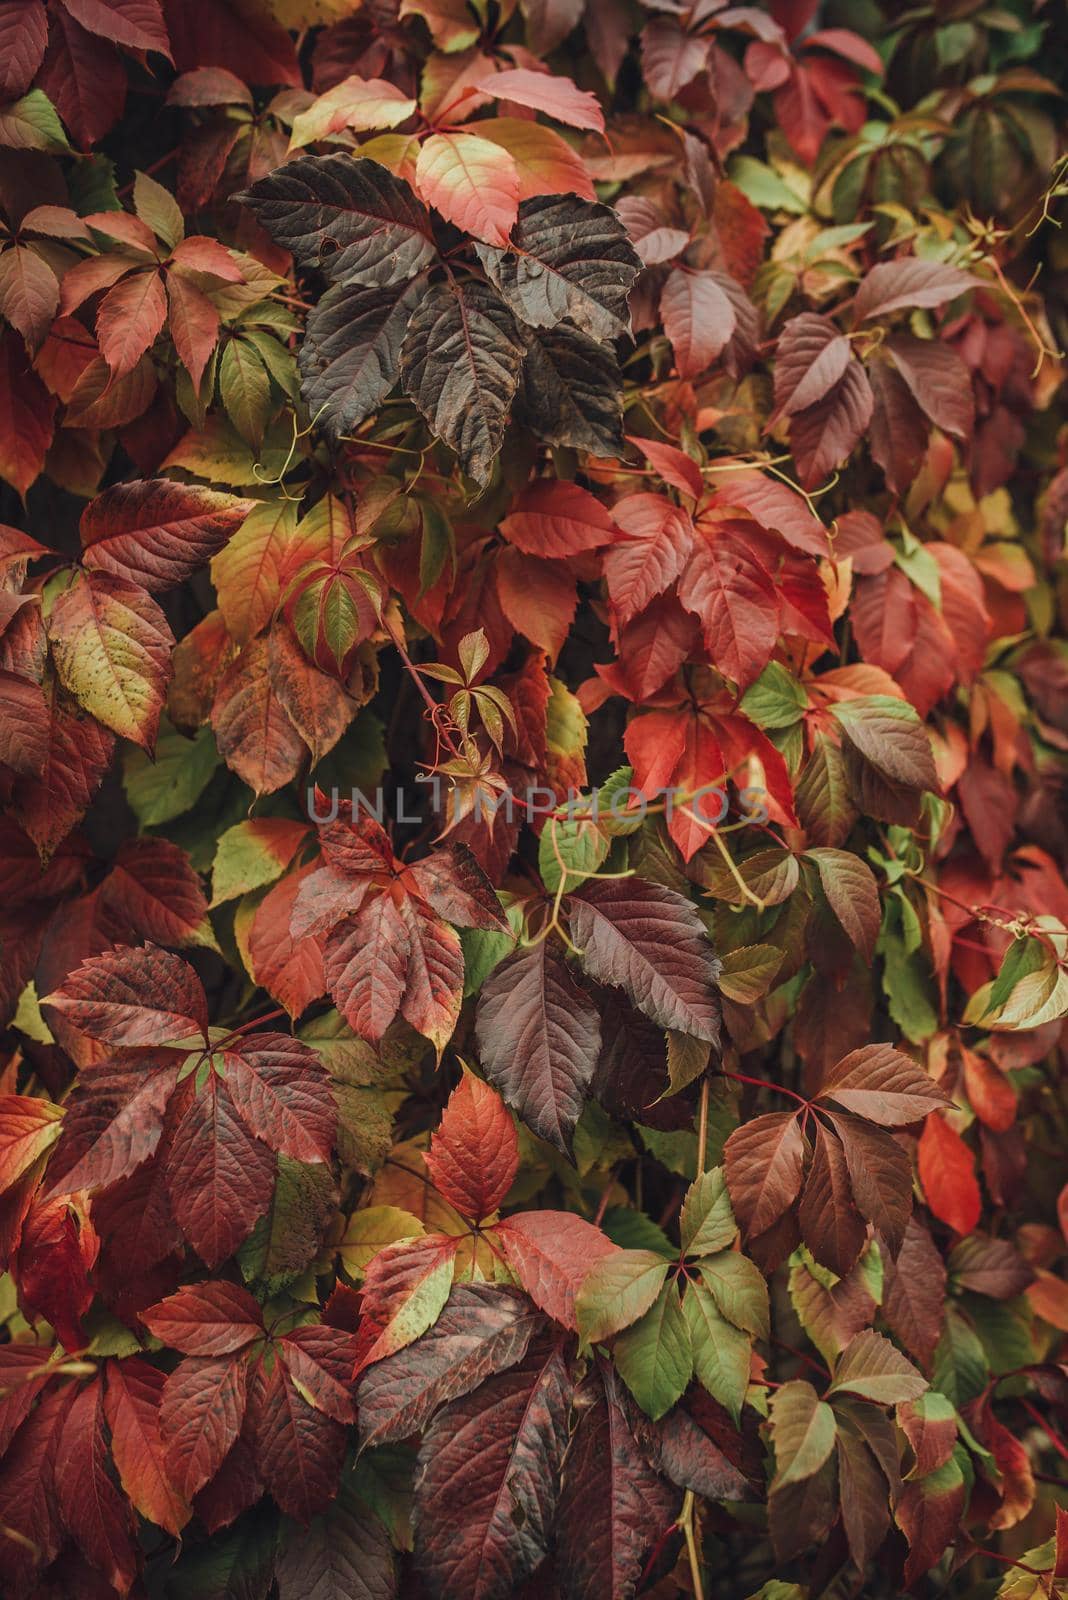 Colorful nature backgrounds with autumn leaves. Nature background mixed colors. Red autumn leaves mixed with green